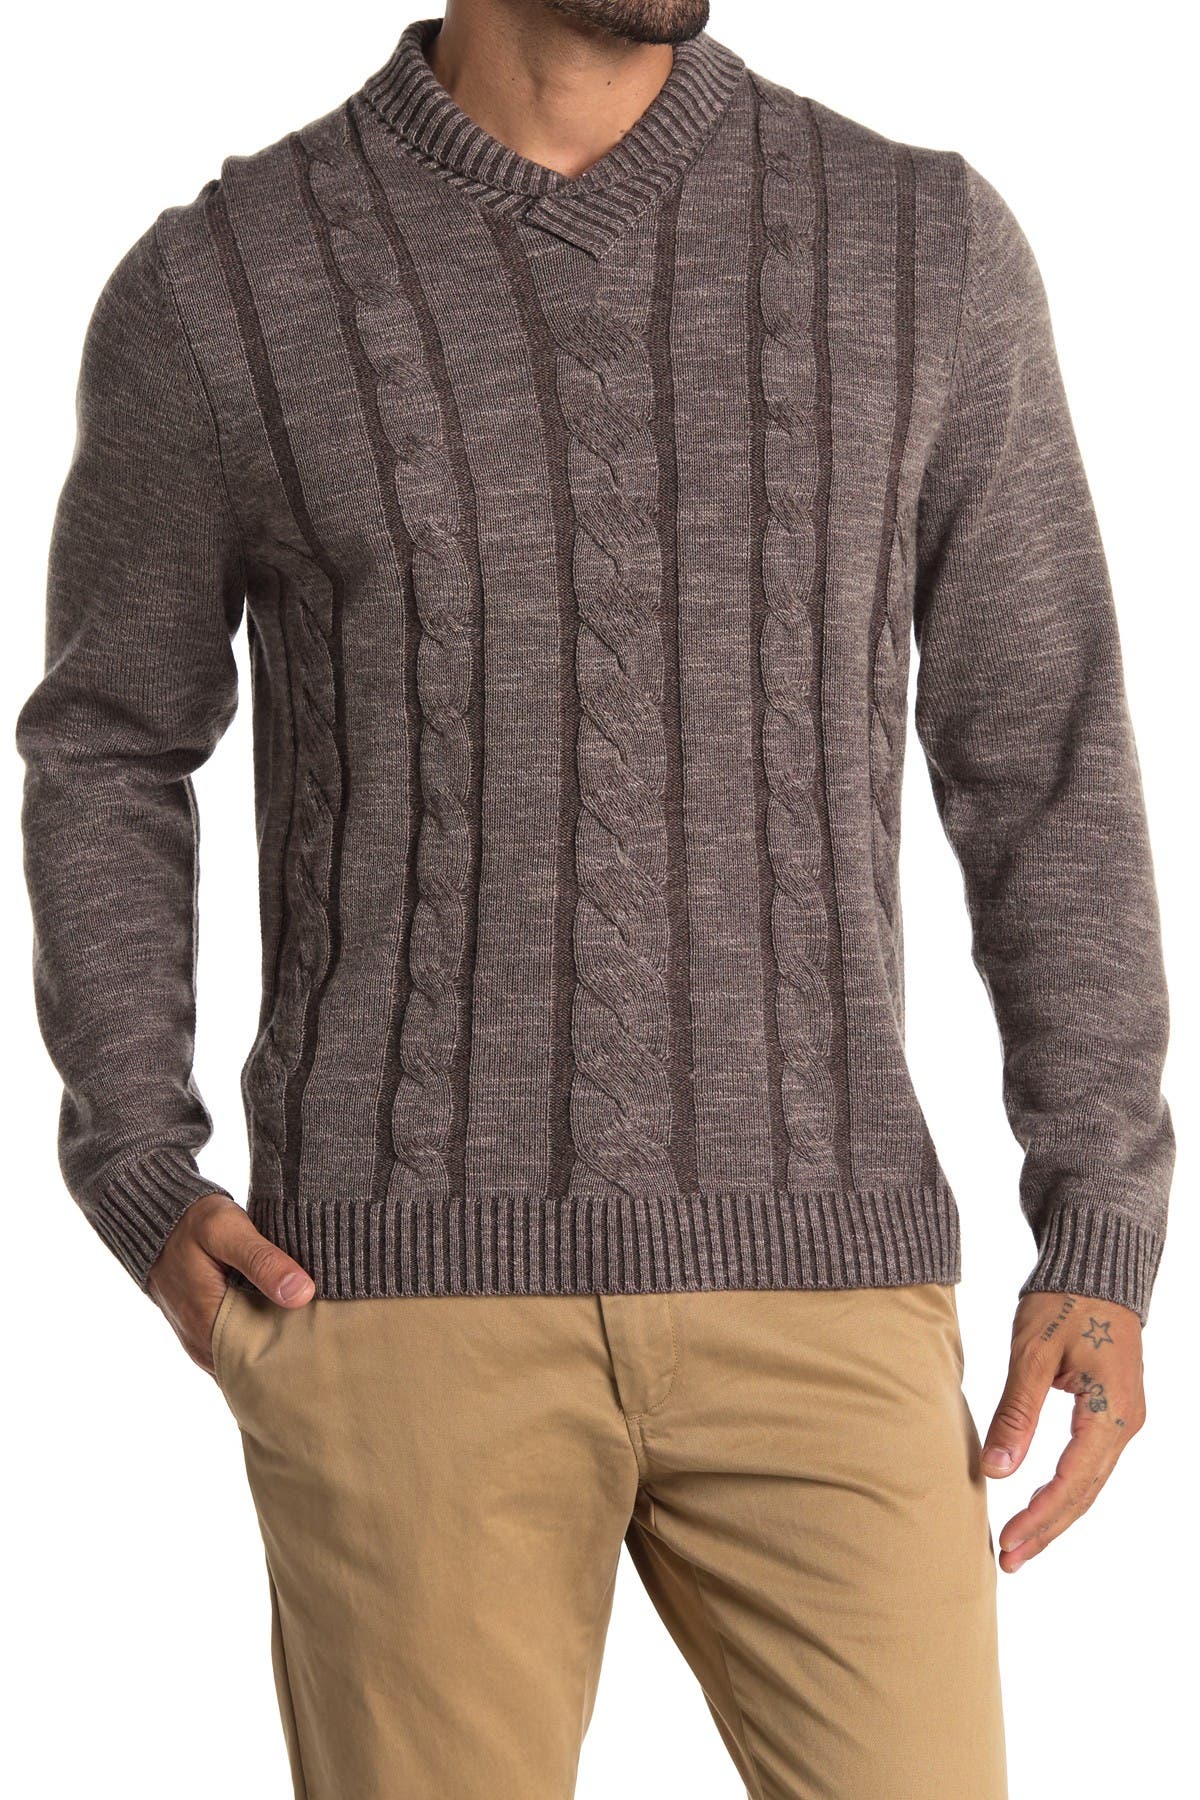 Tommy Bahama | Pinyon Pines Cable Knit 